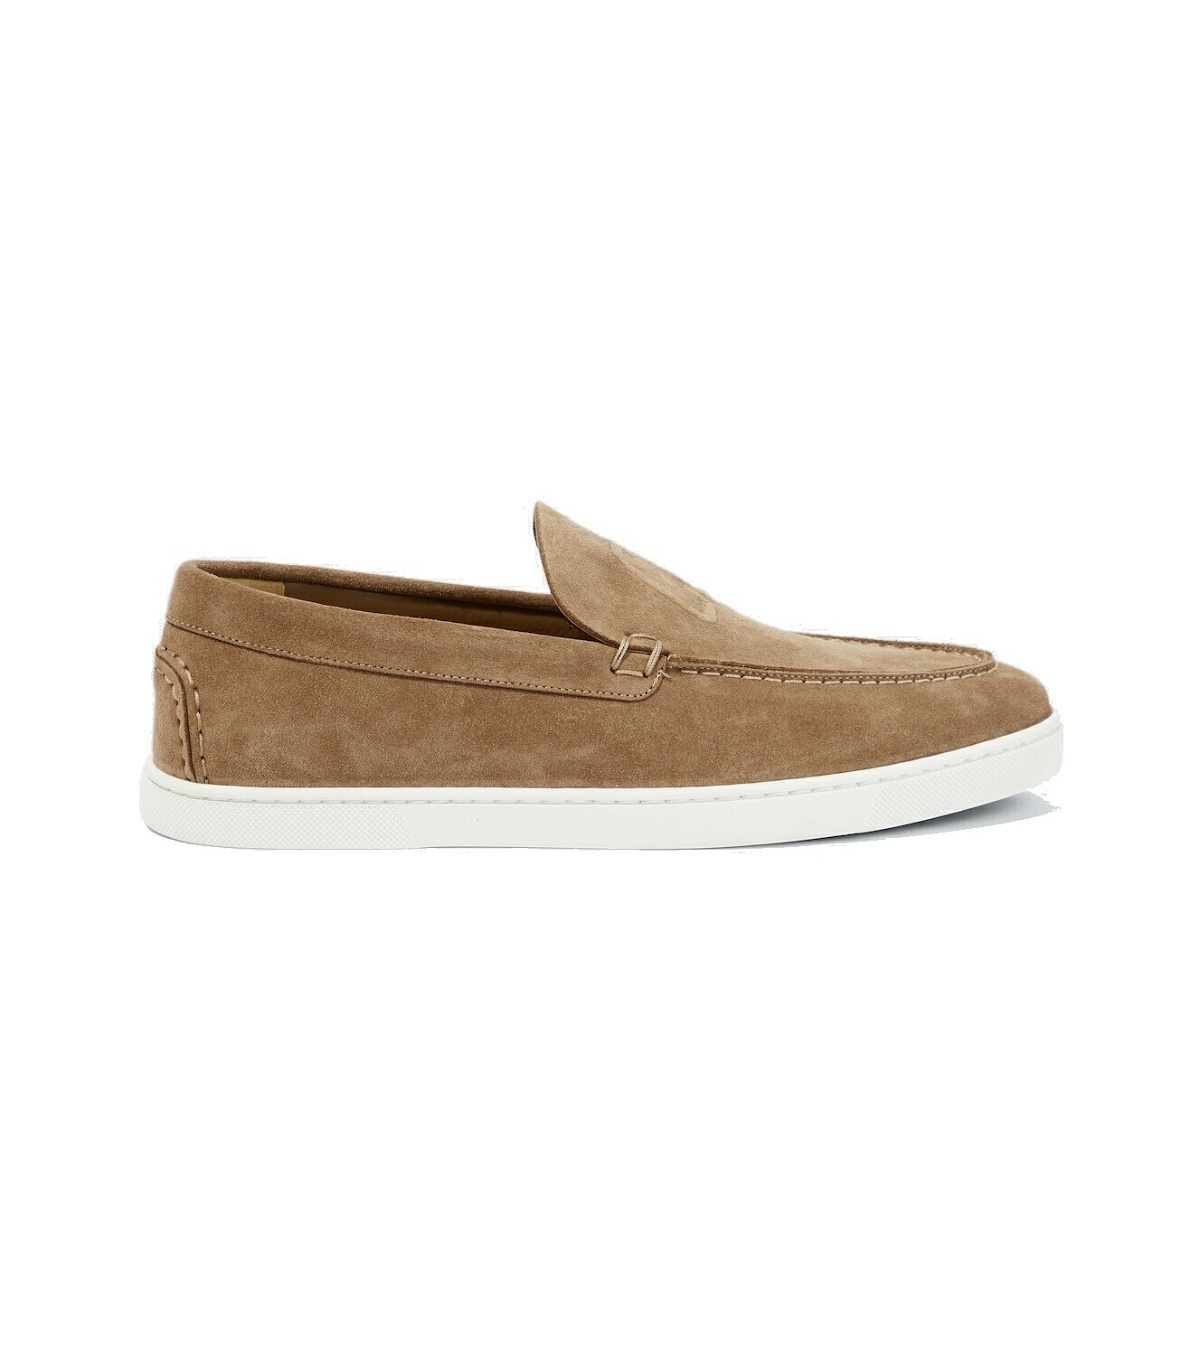 Christian Louboutin Suede loafers Christian Louboutin